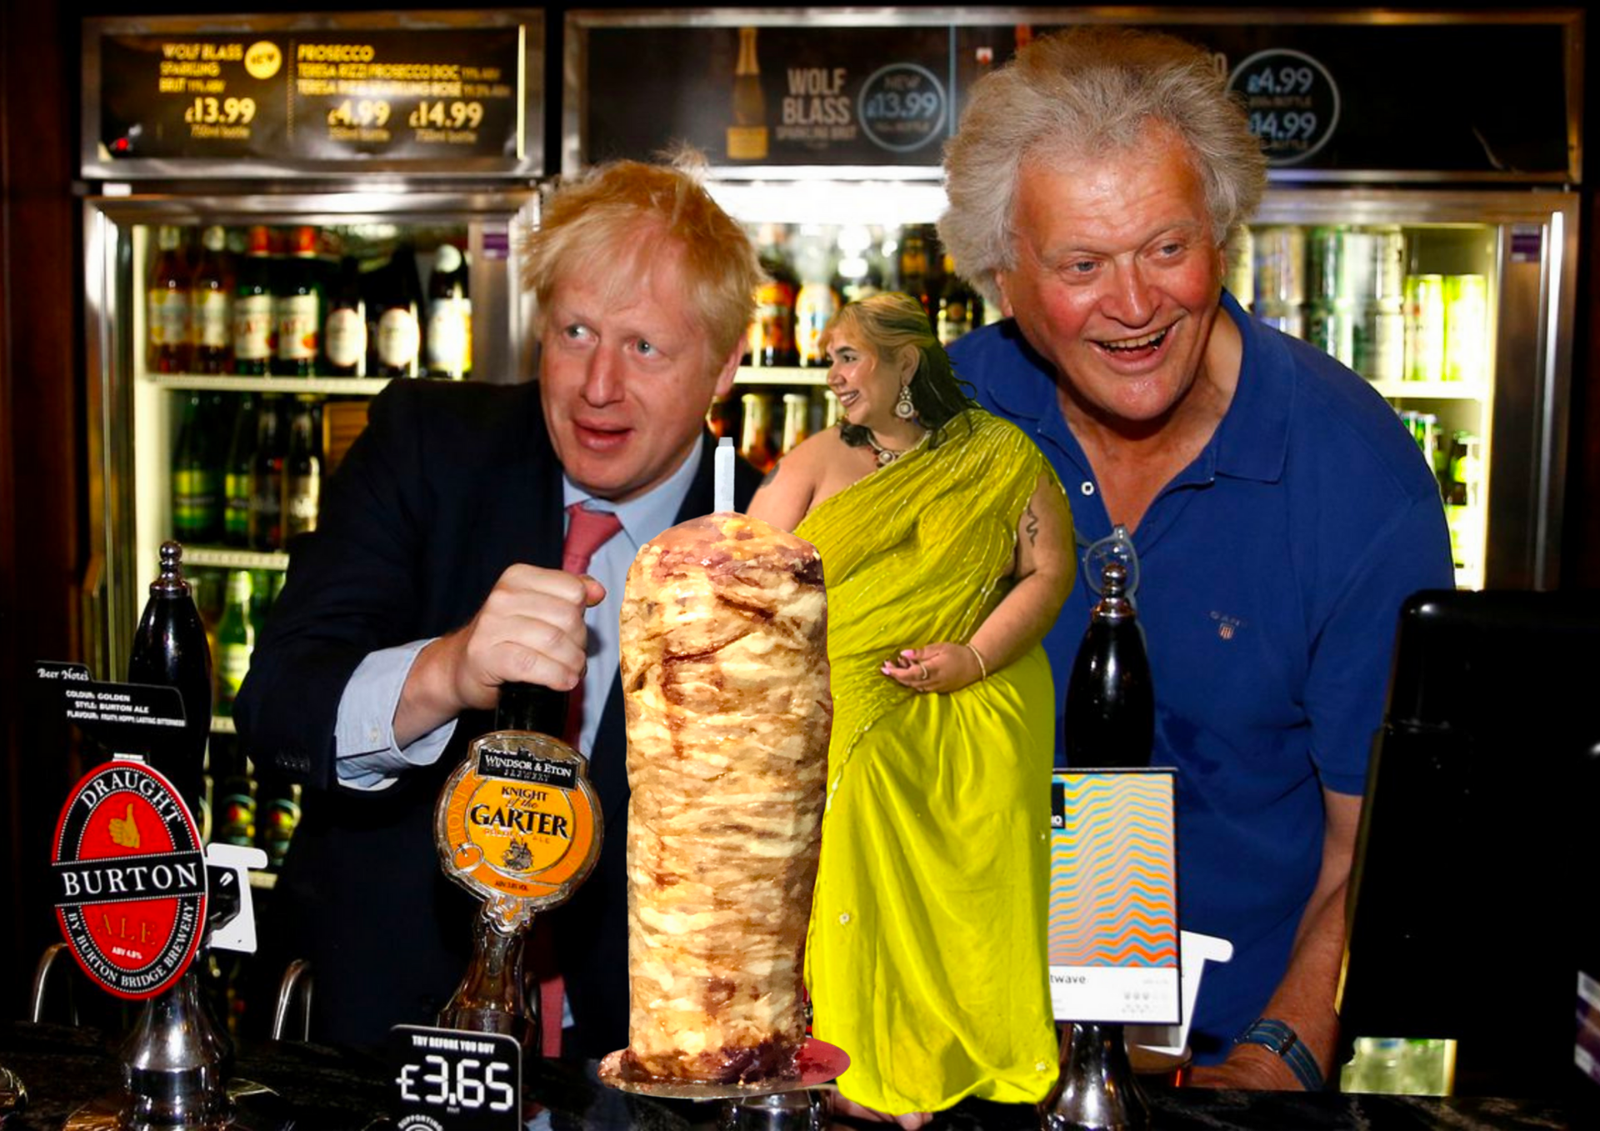 photoshopped brown woman in sari with kebab next to Boris Johnson and Mr Wetherspoons pulling a pint